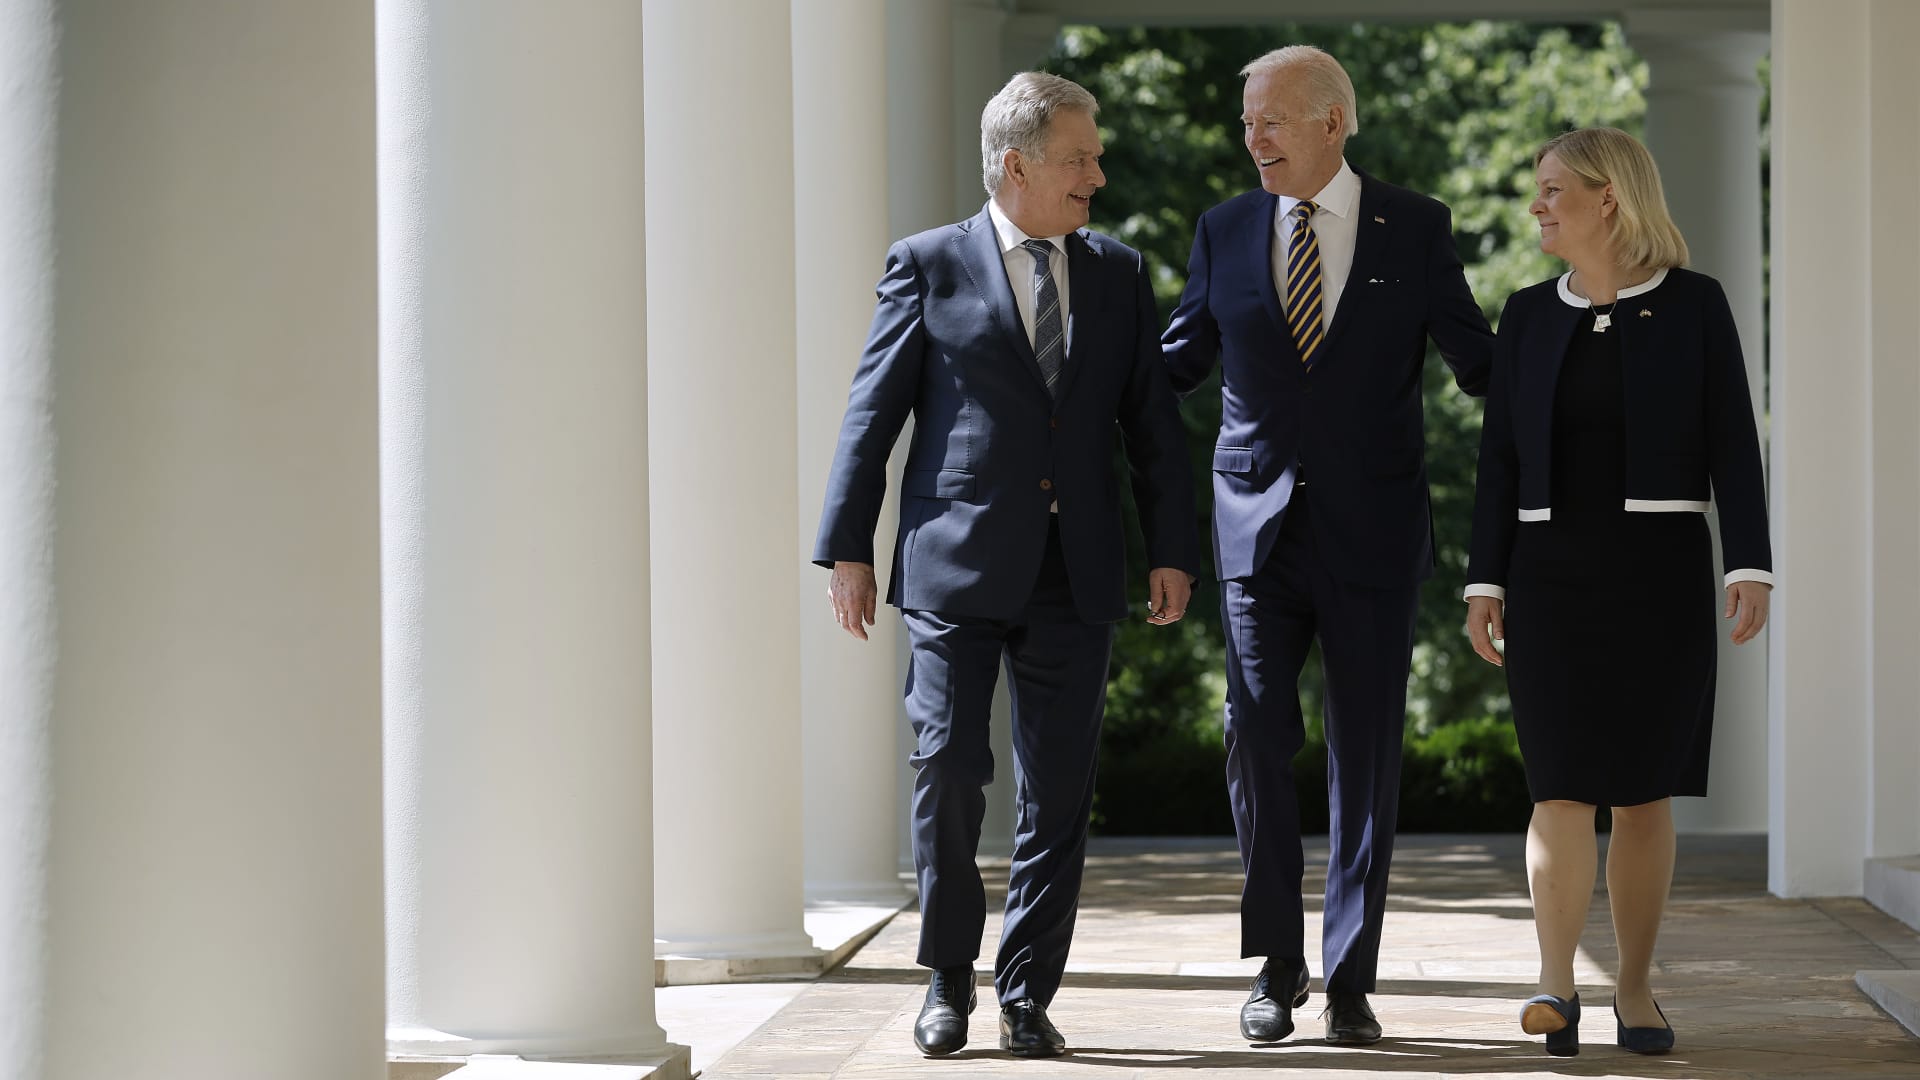 U.S. President Joe Biden walks with Finland's President Sauli Niinisto (left) and Sweden's Prime Minister Magdalena Andersson along the Rose Garden colonnade before making statements to the press at the White House on May 19, 2022.